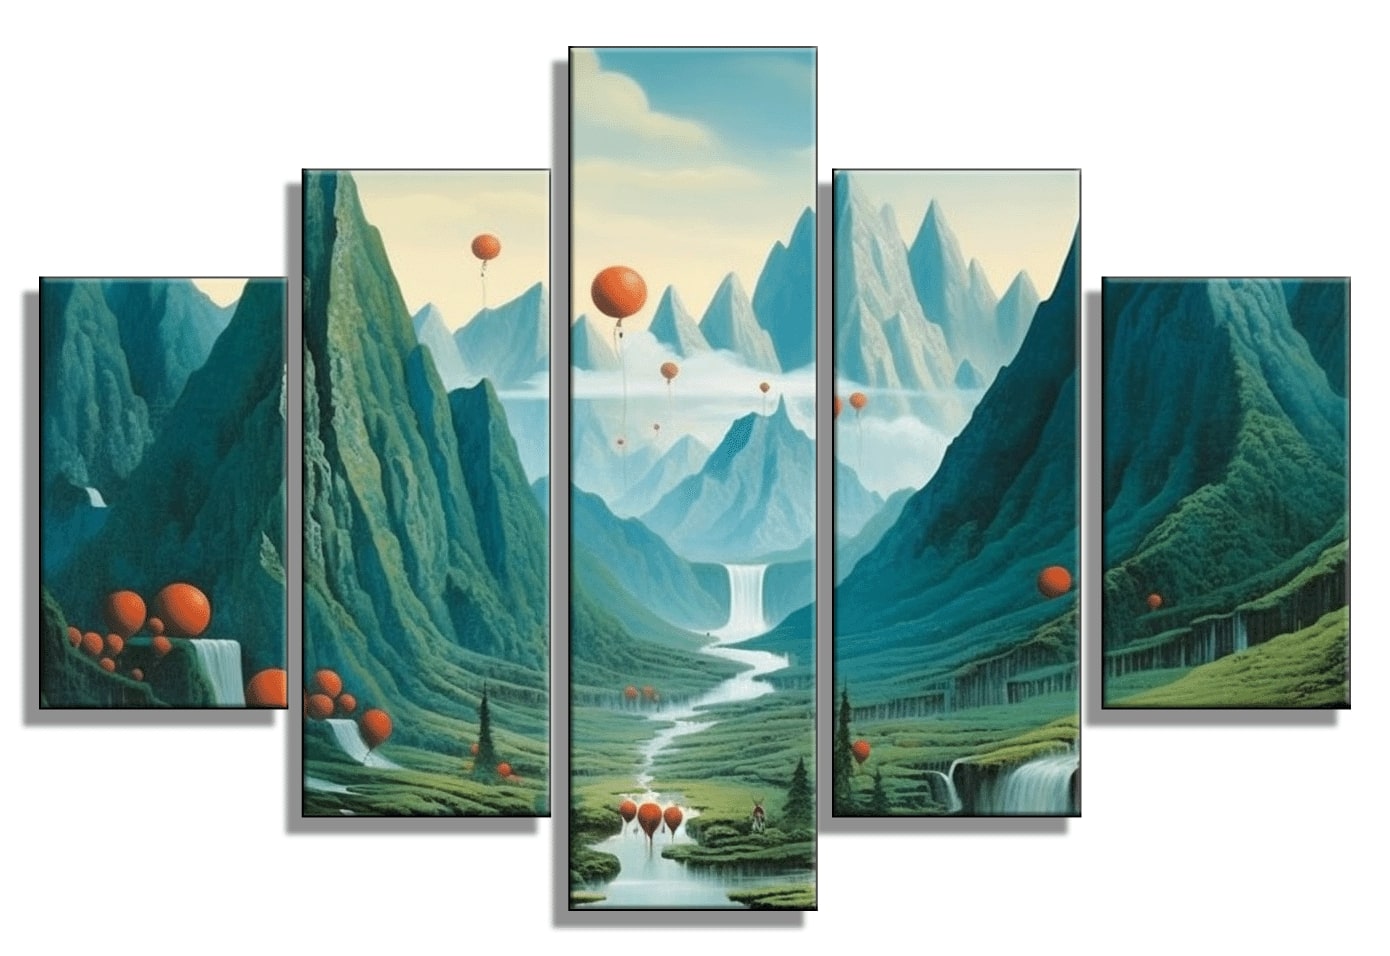 Multi-Panel Landscape Rwenzori Mountains Surreal Painting - 40x60 inches